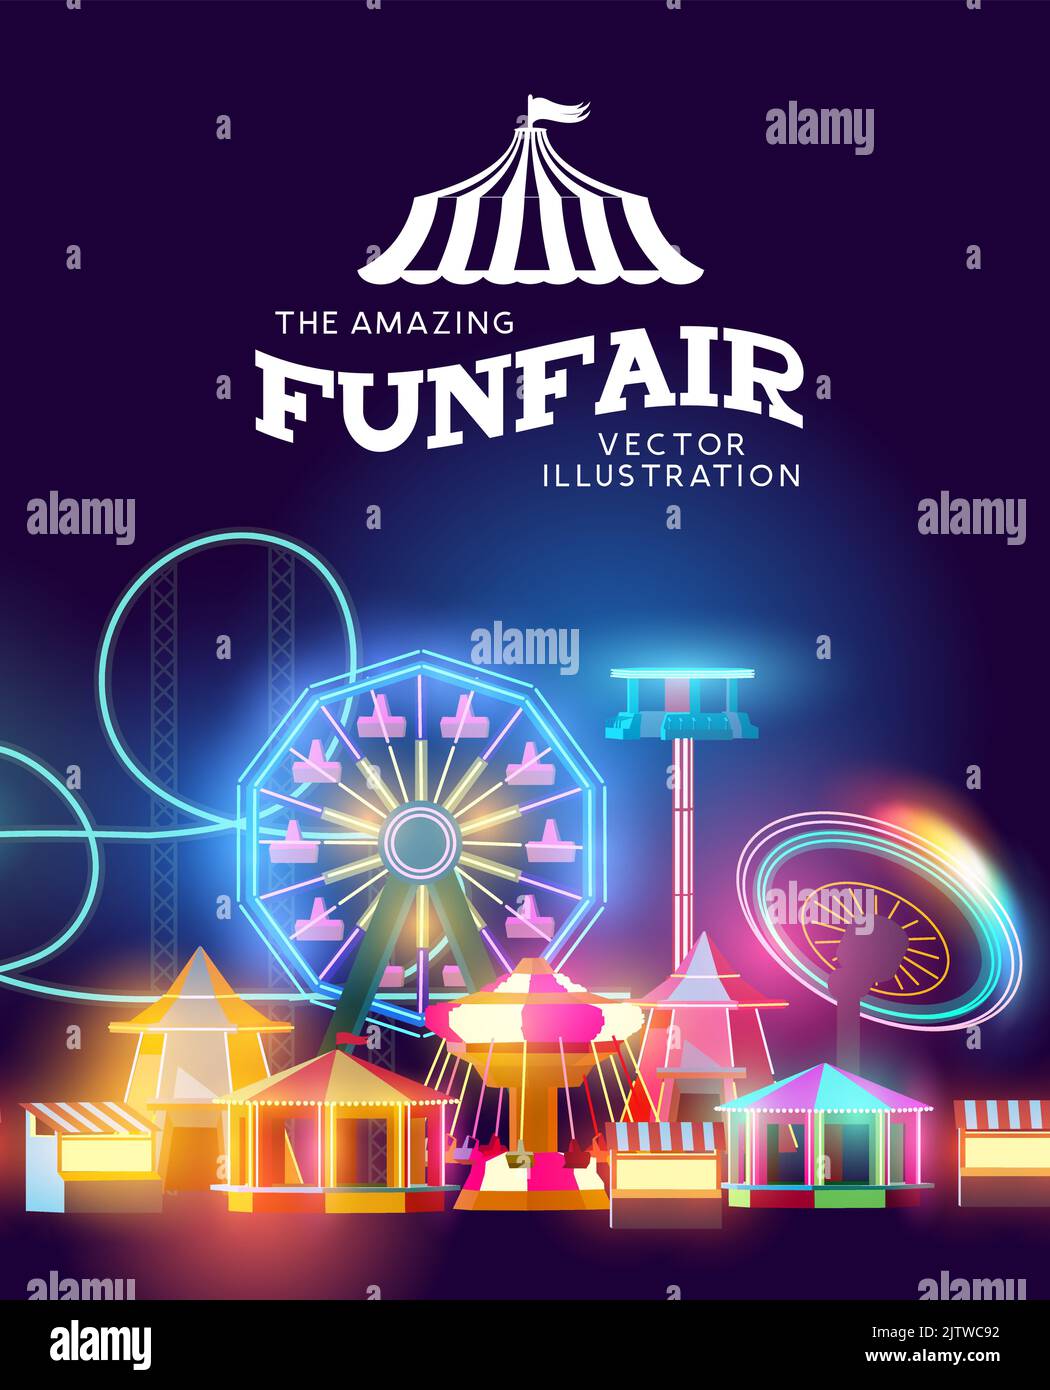 Fairground and amusement park with rides and attractions. Vector illustration Stock Vector